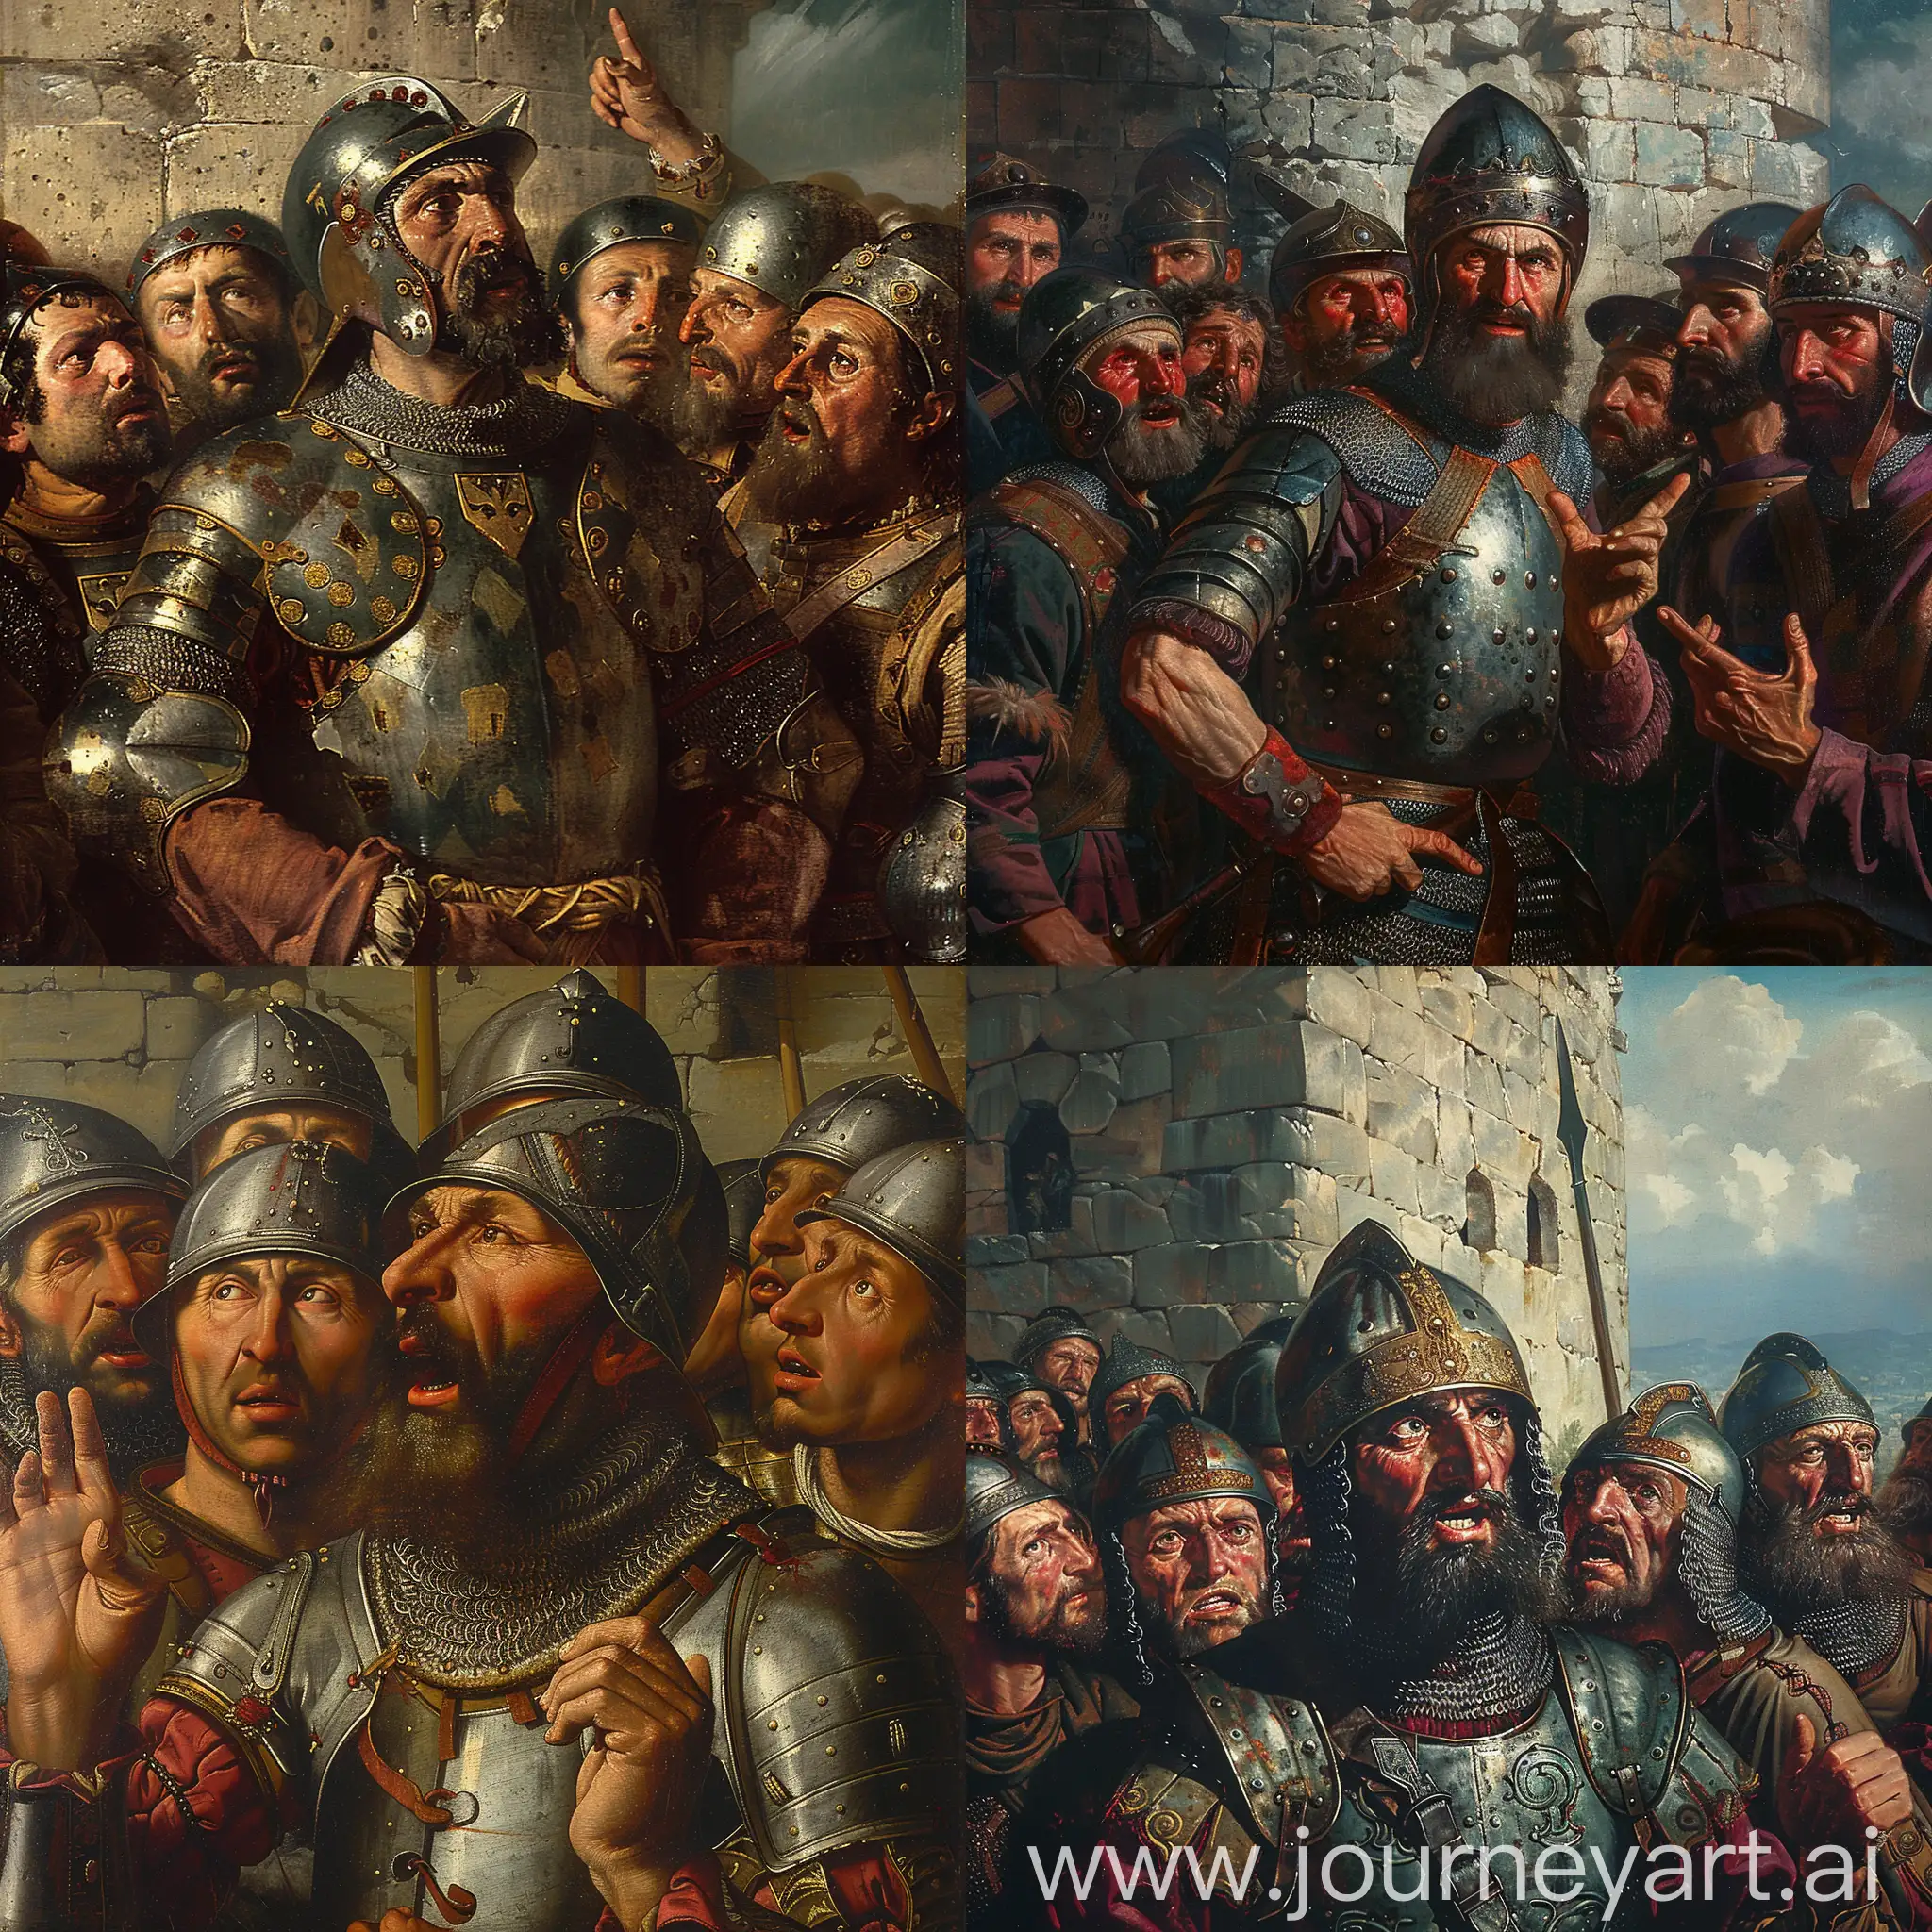 Giovanni Giustiniani Longo depicted in Genoese armor and helmet, he has no beard, his genoese warriors around him, he is making a motivational speech, they are at the wall of Constantinople, in the year 1453, dramatic lighting